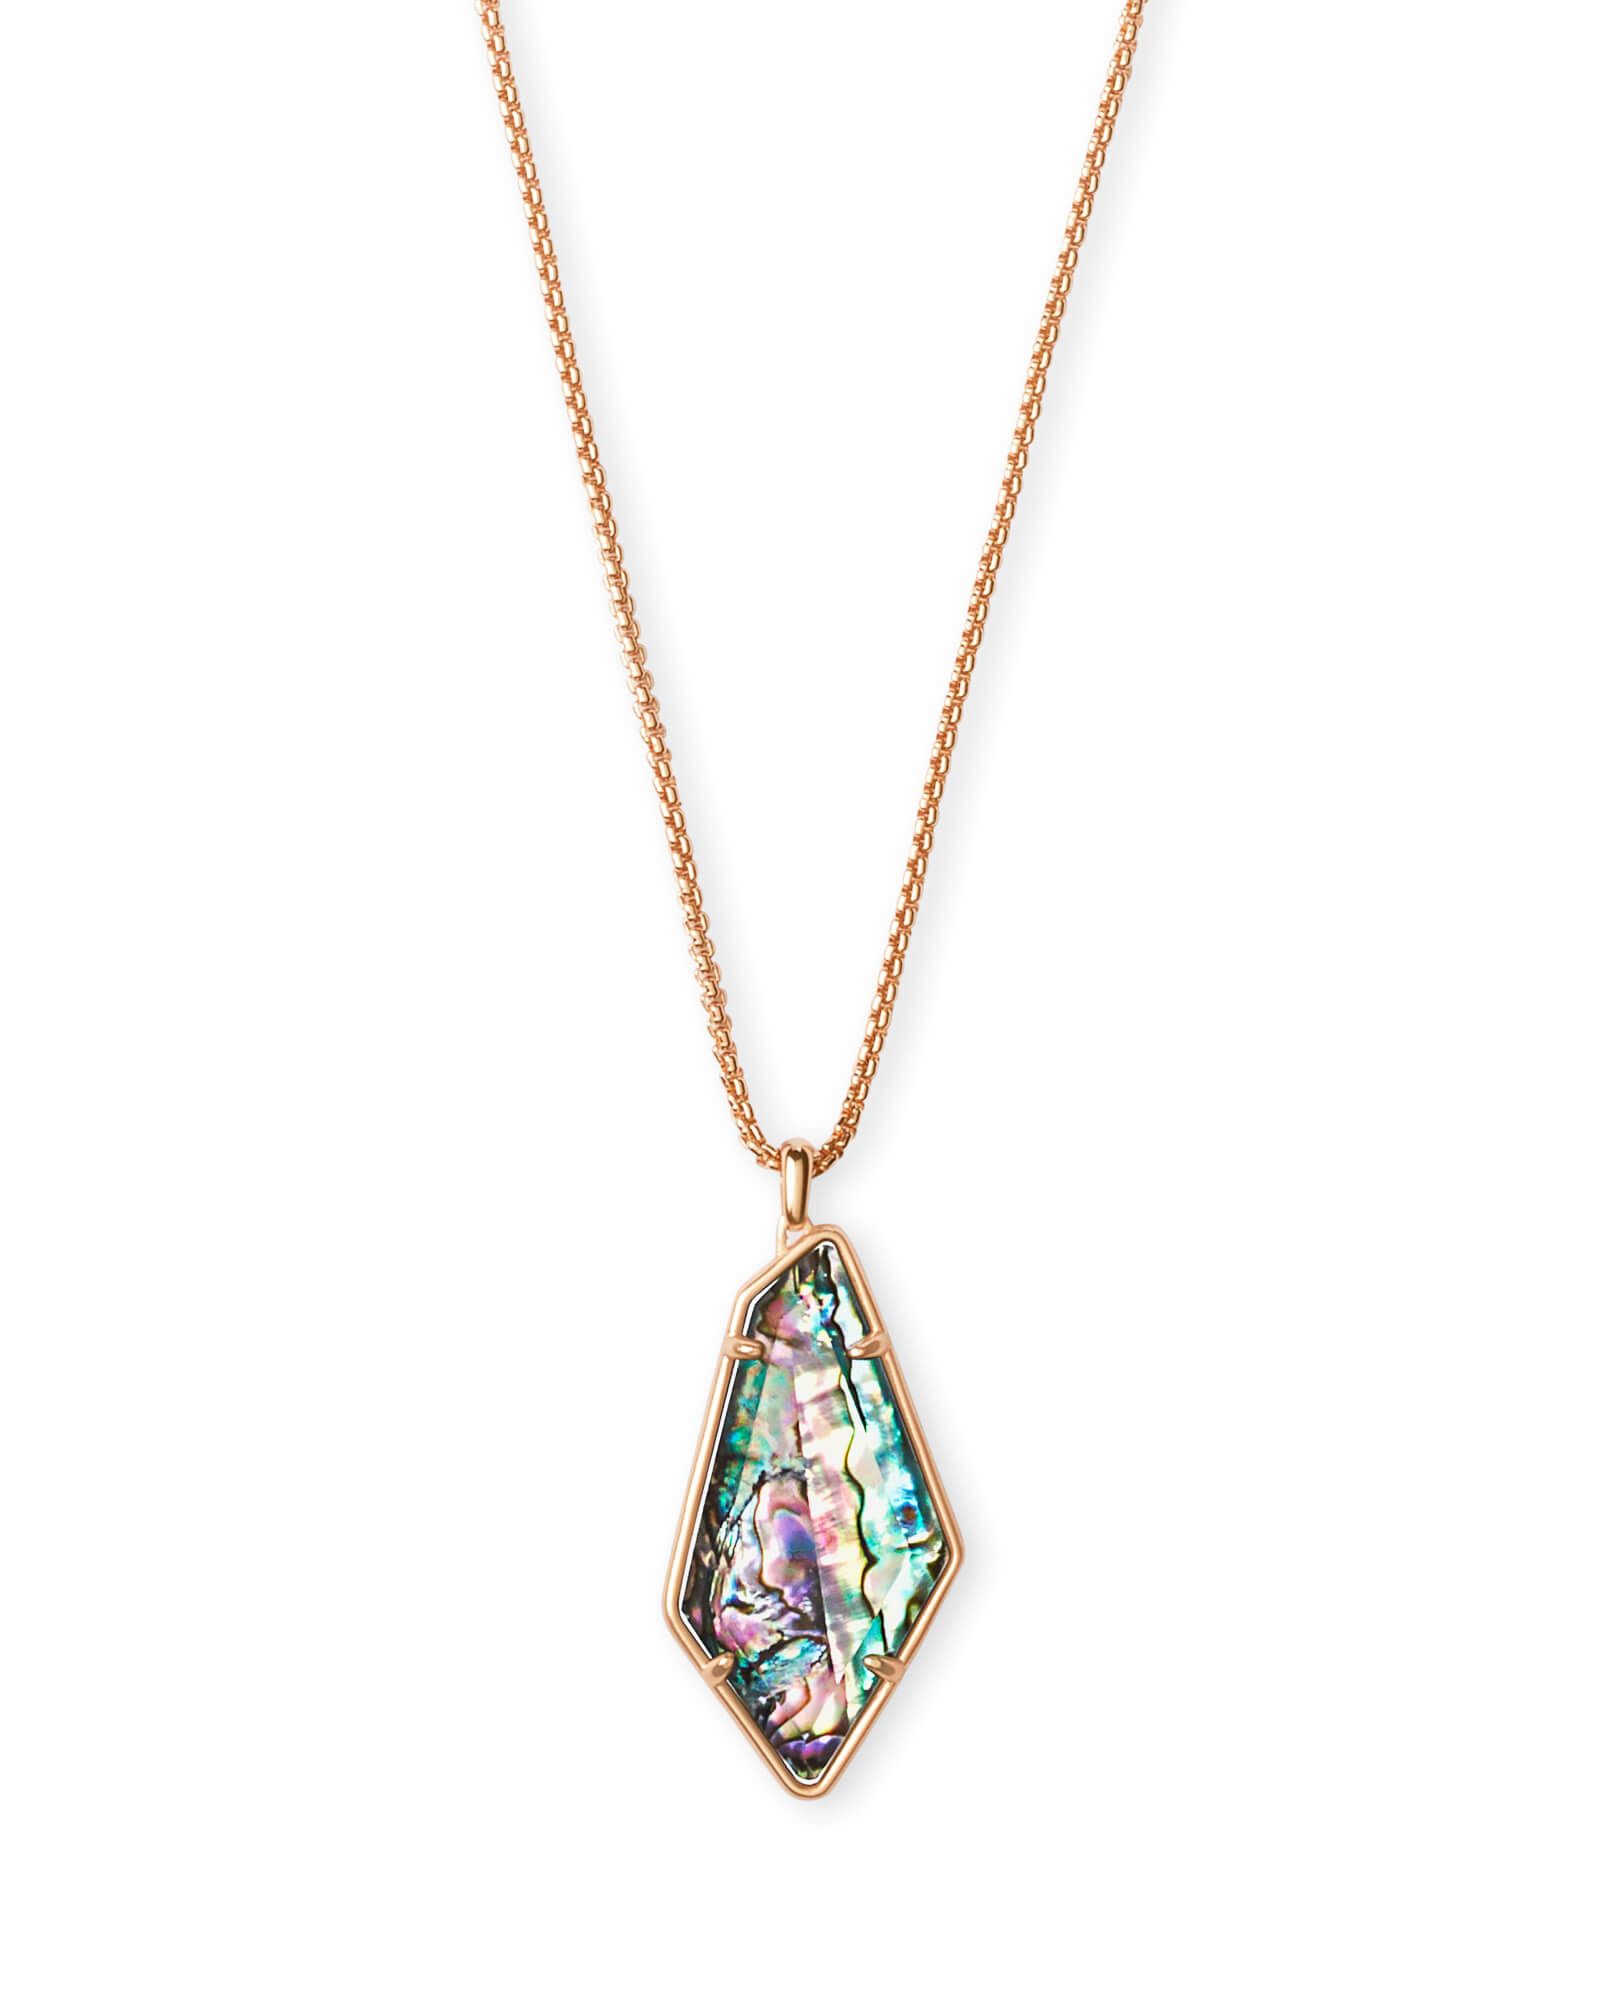 Lilith Rose Gold Long Pendant Necklace in Abalone Shell | Kendra Scott | Kendra Scott